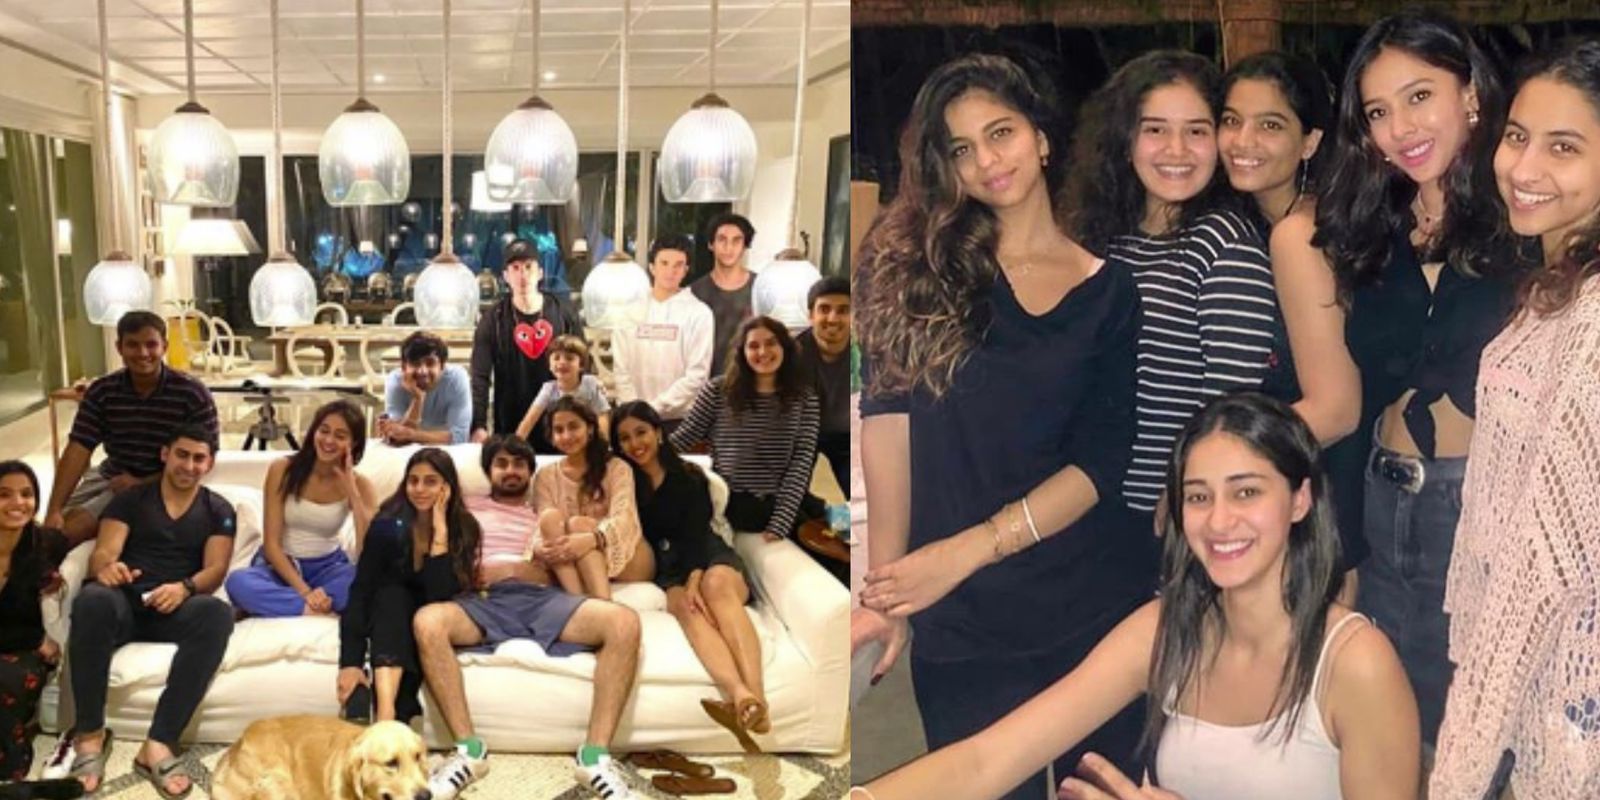 Suhana Khan Parties With BFF Ananya Panday And Her Siblings, Aryan And AbRam At Alibaug. See Pictures...